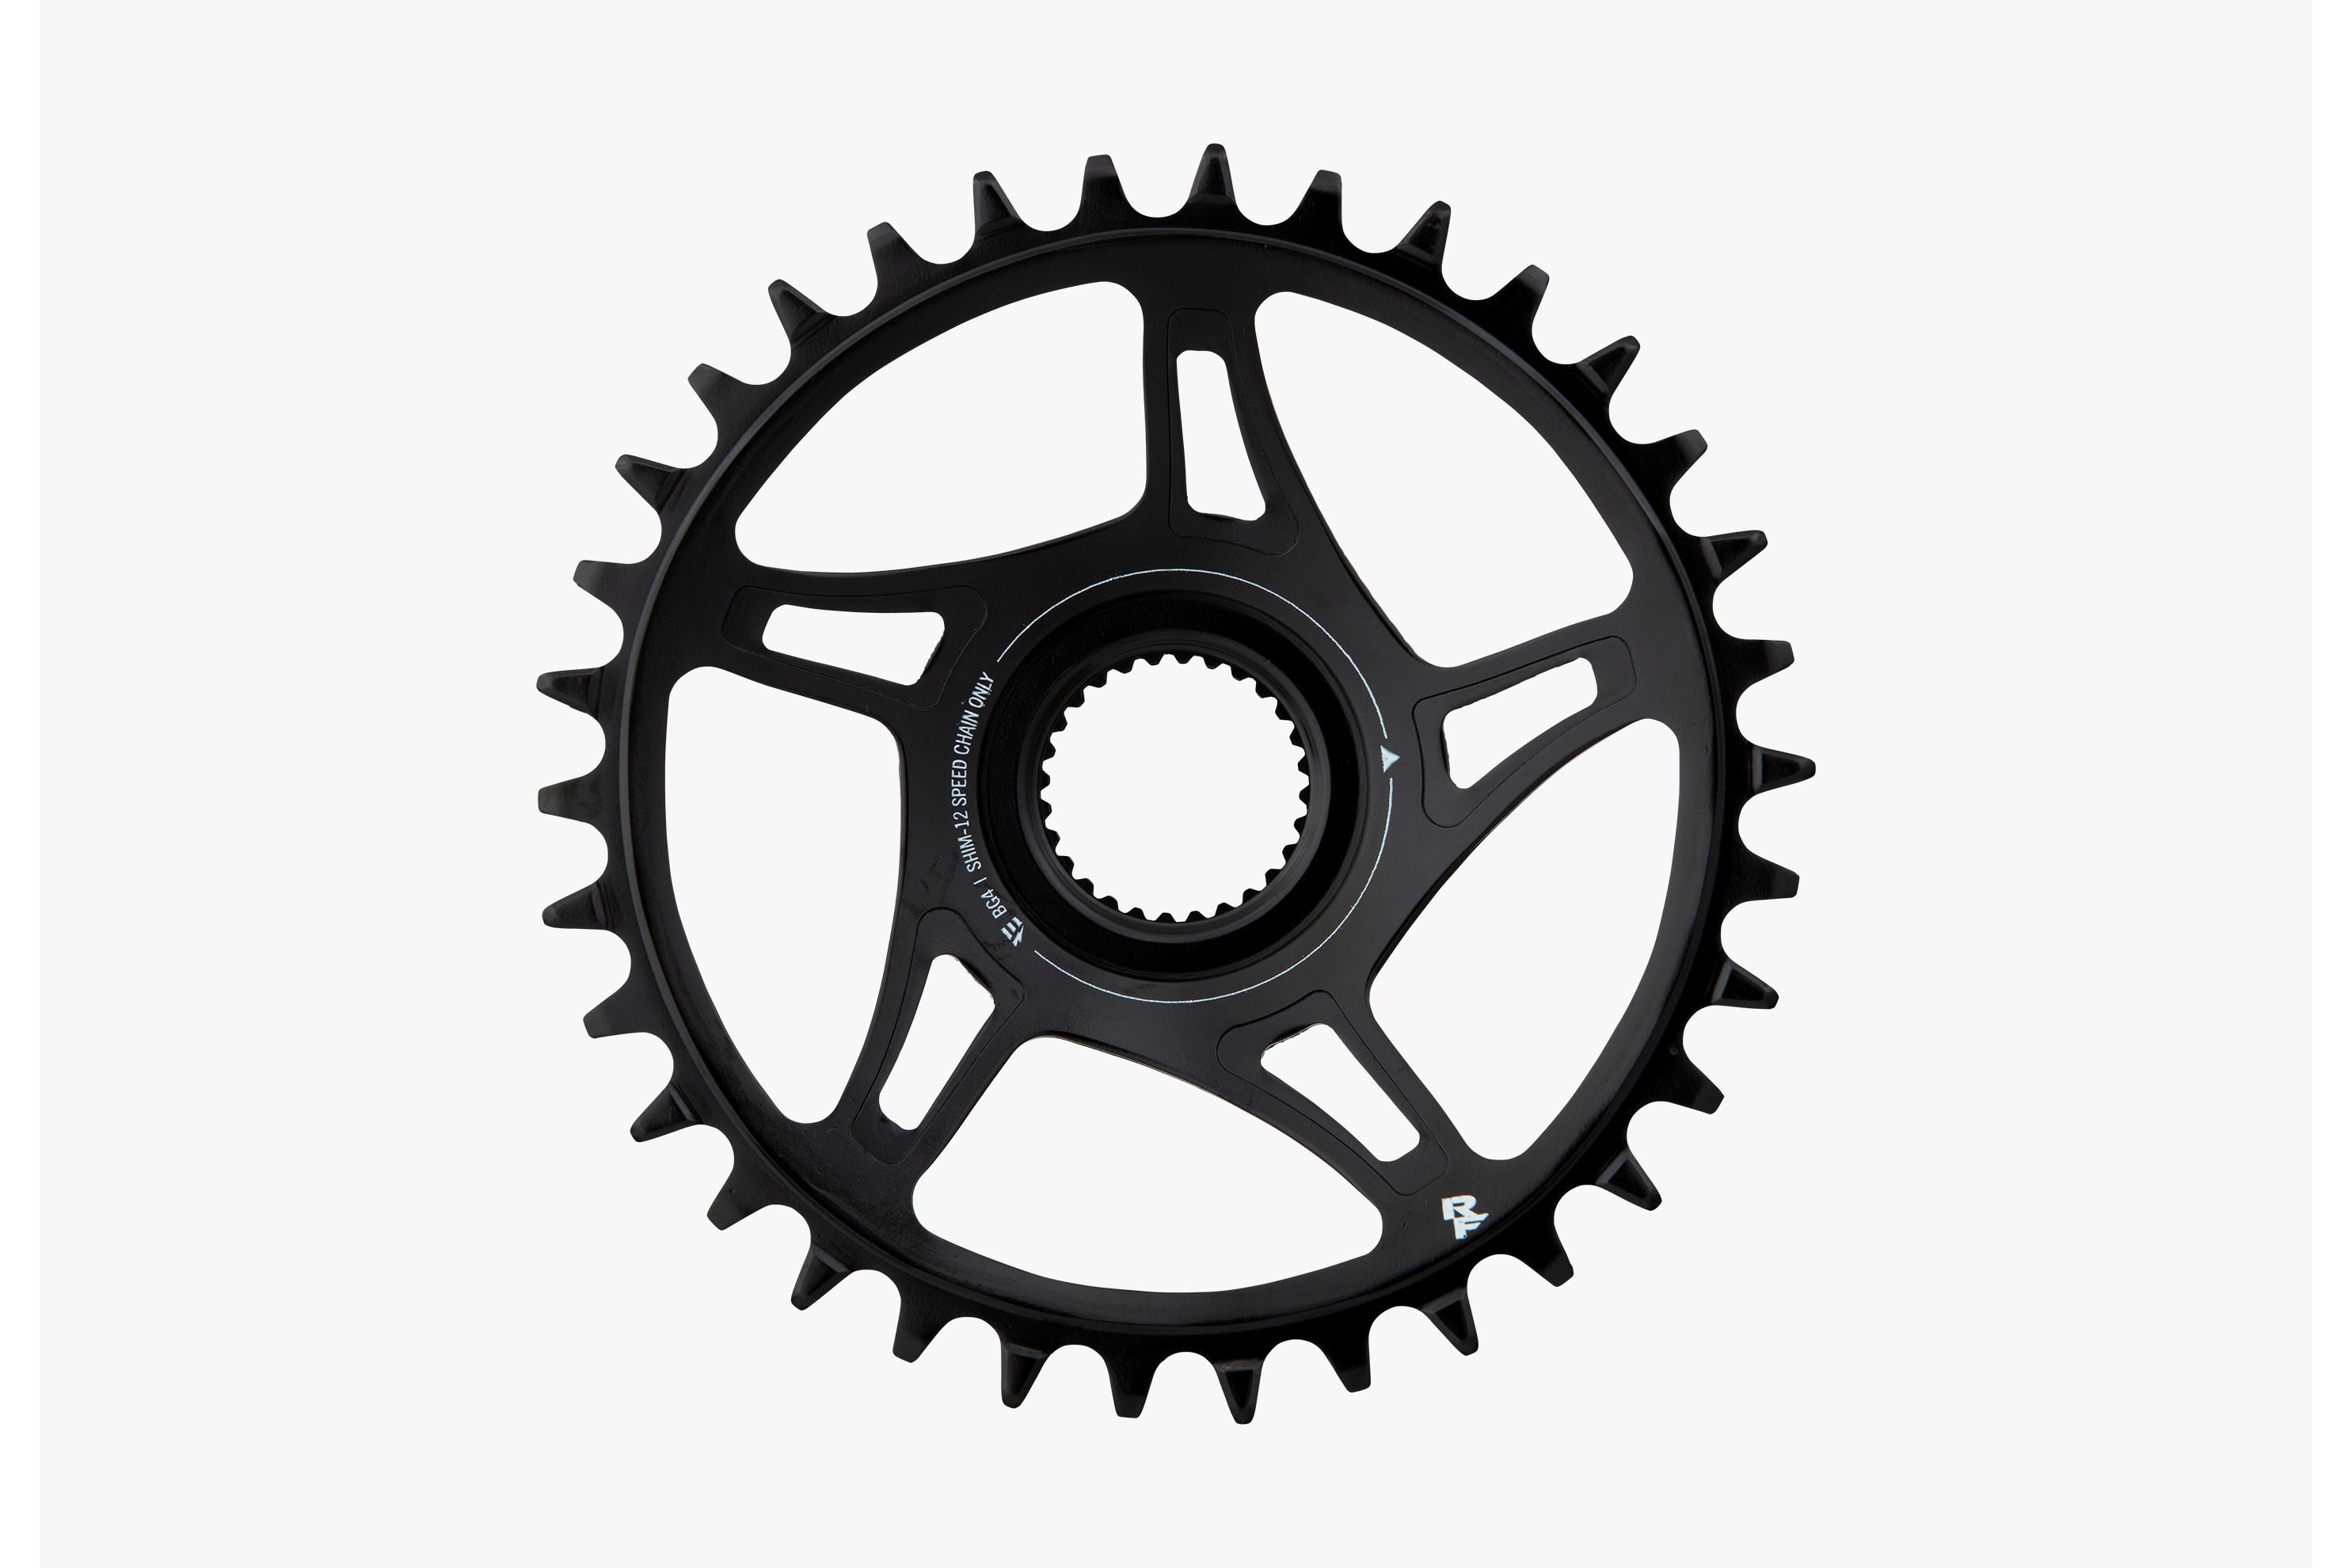 RaceFace Bosch G4 eMTB Chainring 34T (Shimano 12 Speed)